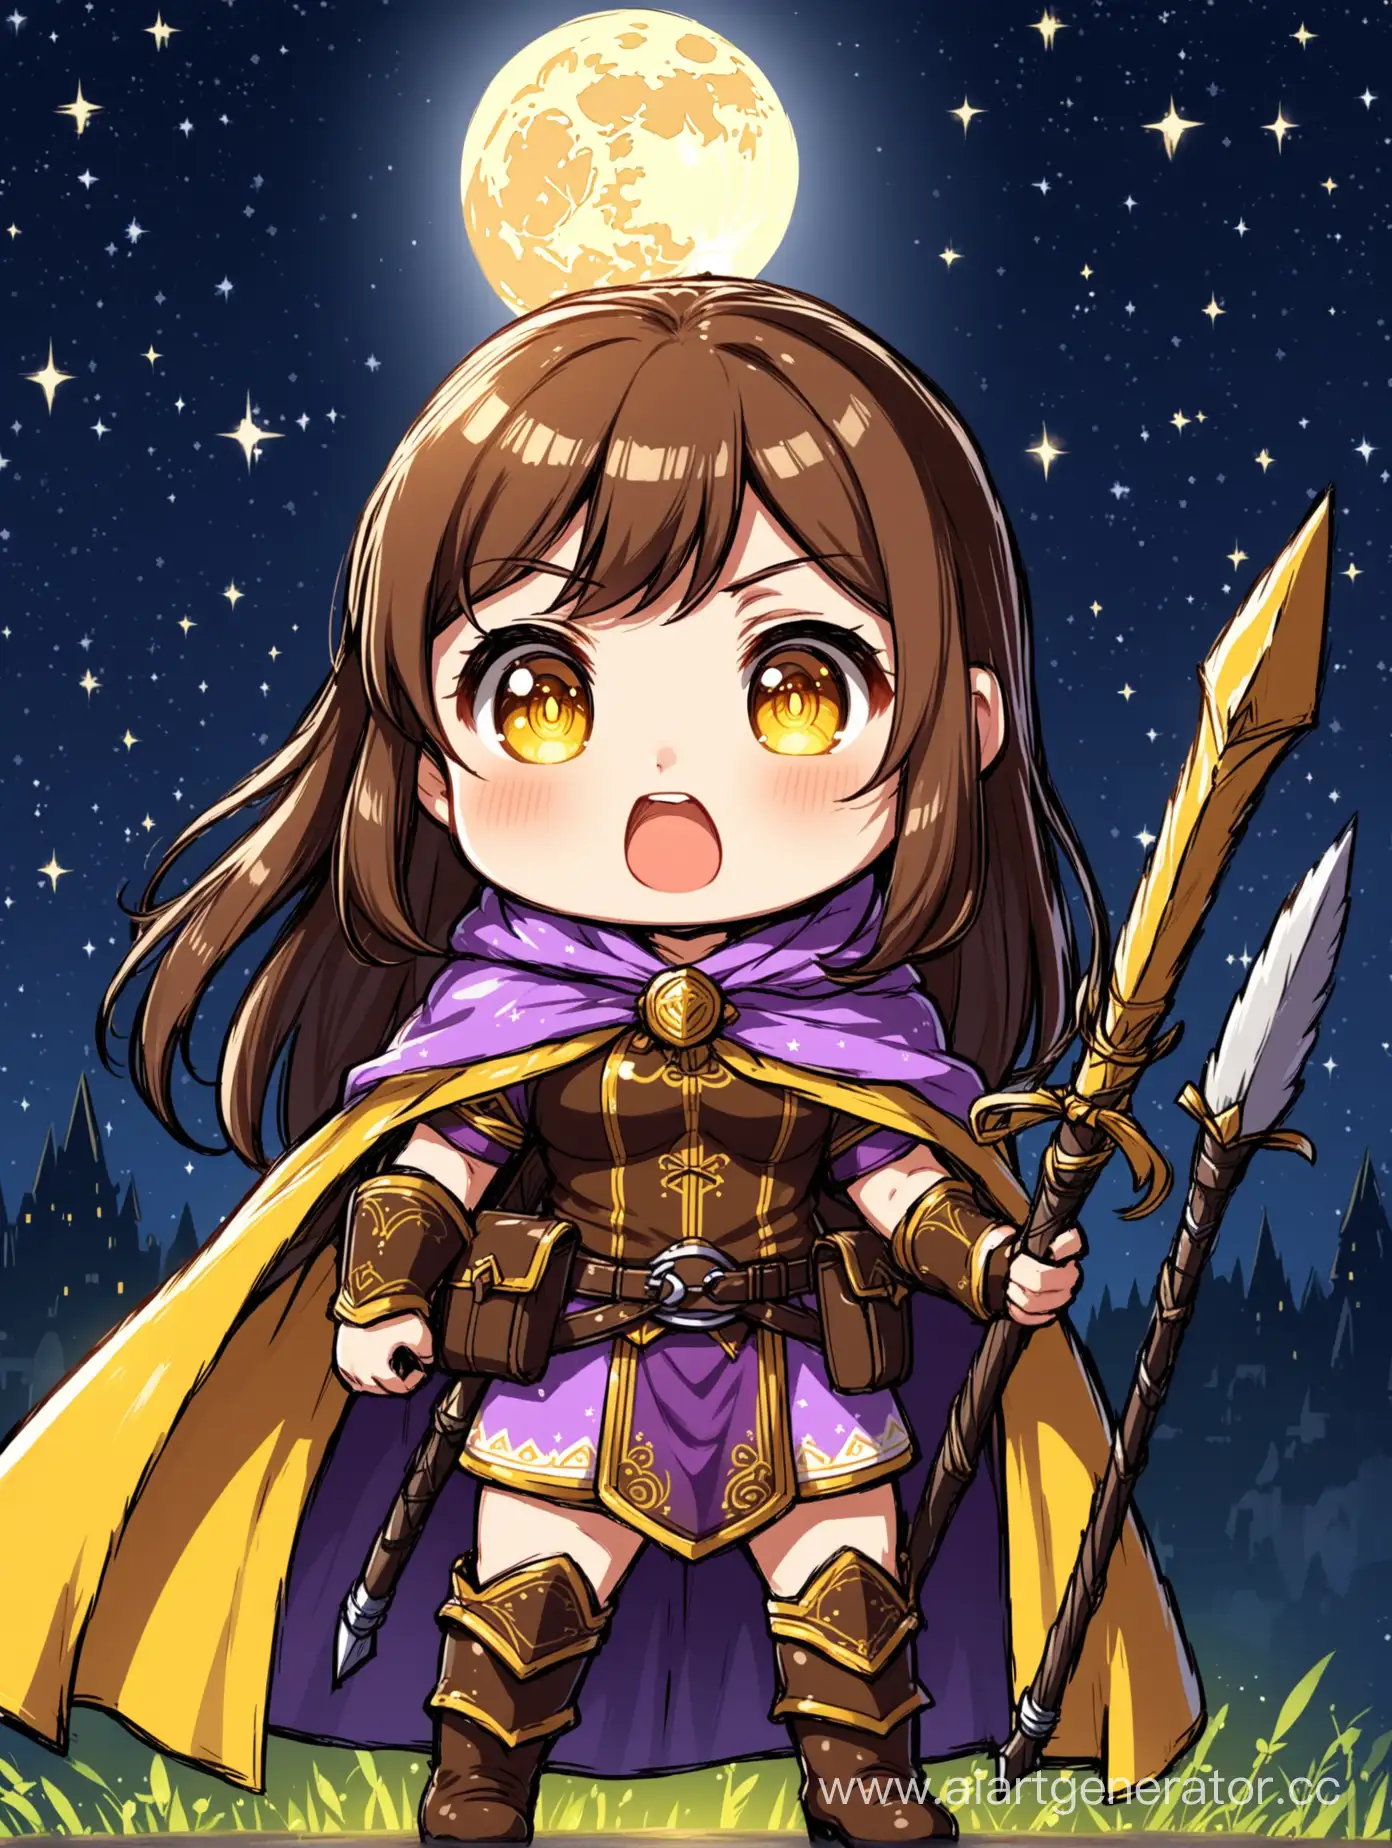 Chibi-Style-Surprised-Female-Adventurer-with-Bow-and-Quiver-Under-Moonlight